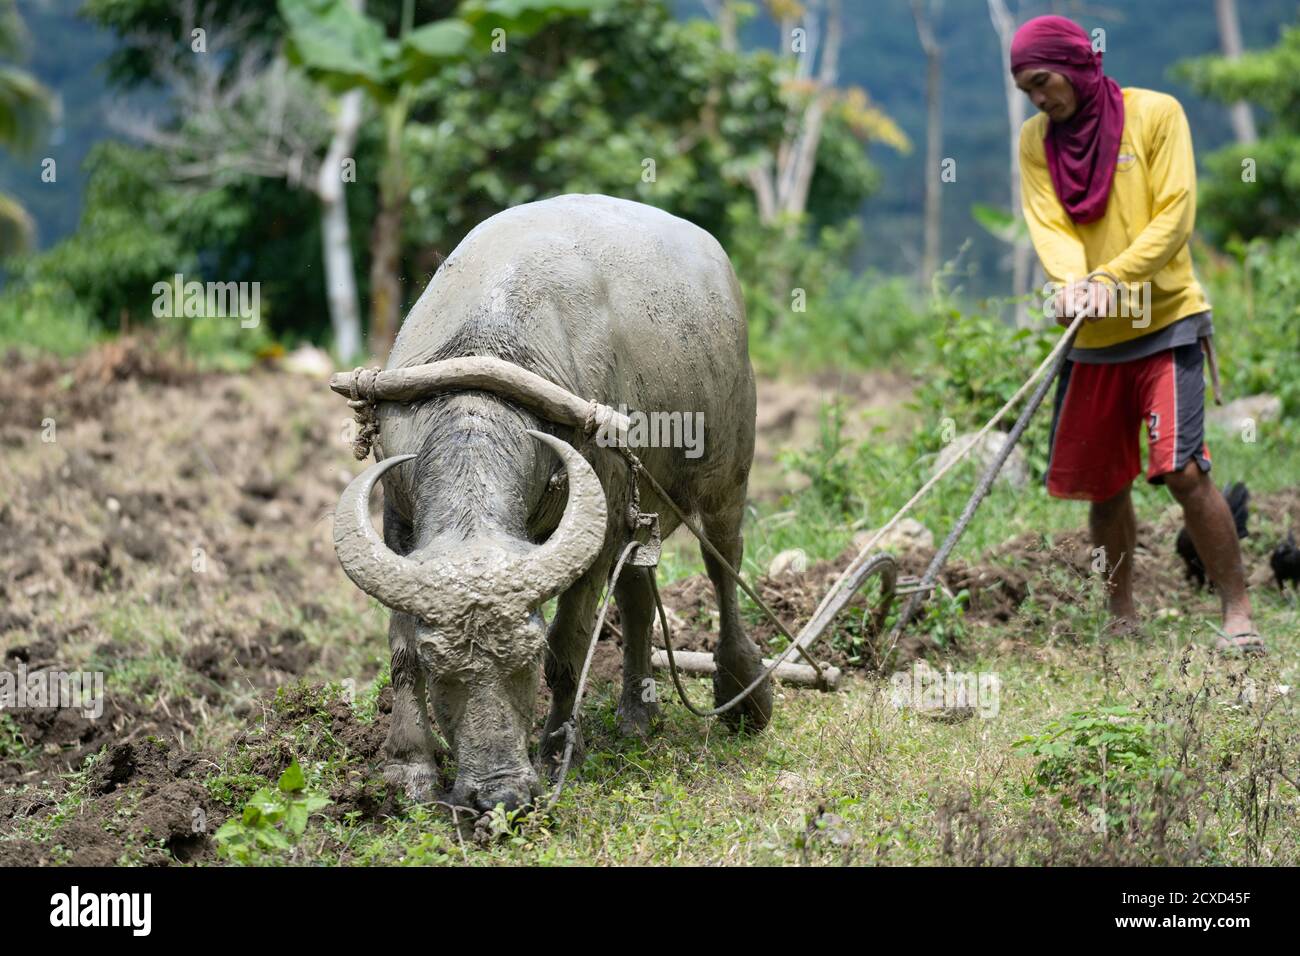 A Filipino farmer using a Carabao to plough the land ready for planting vegetables. Provincial mountain area, Cebu, Philippines Stock Photo